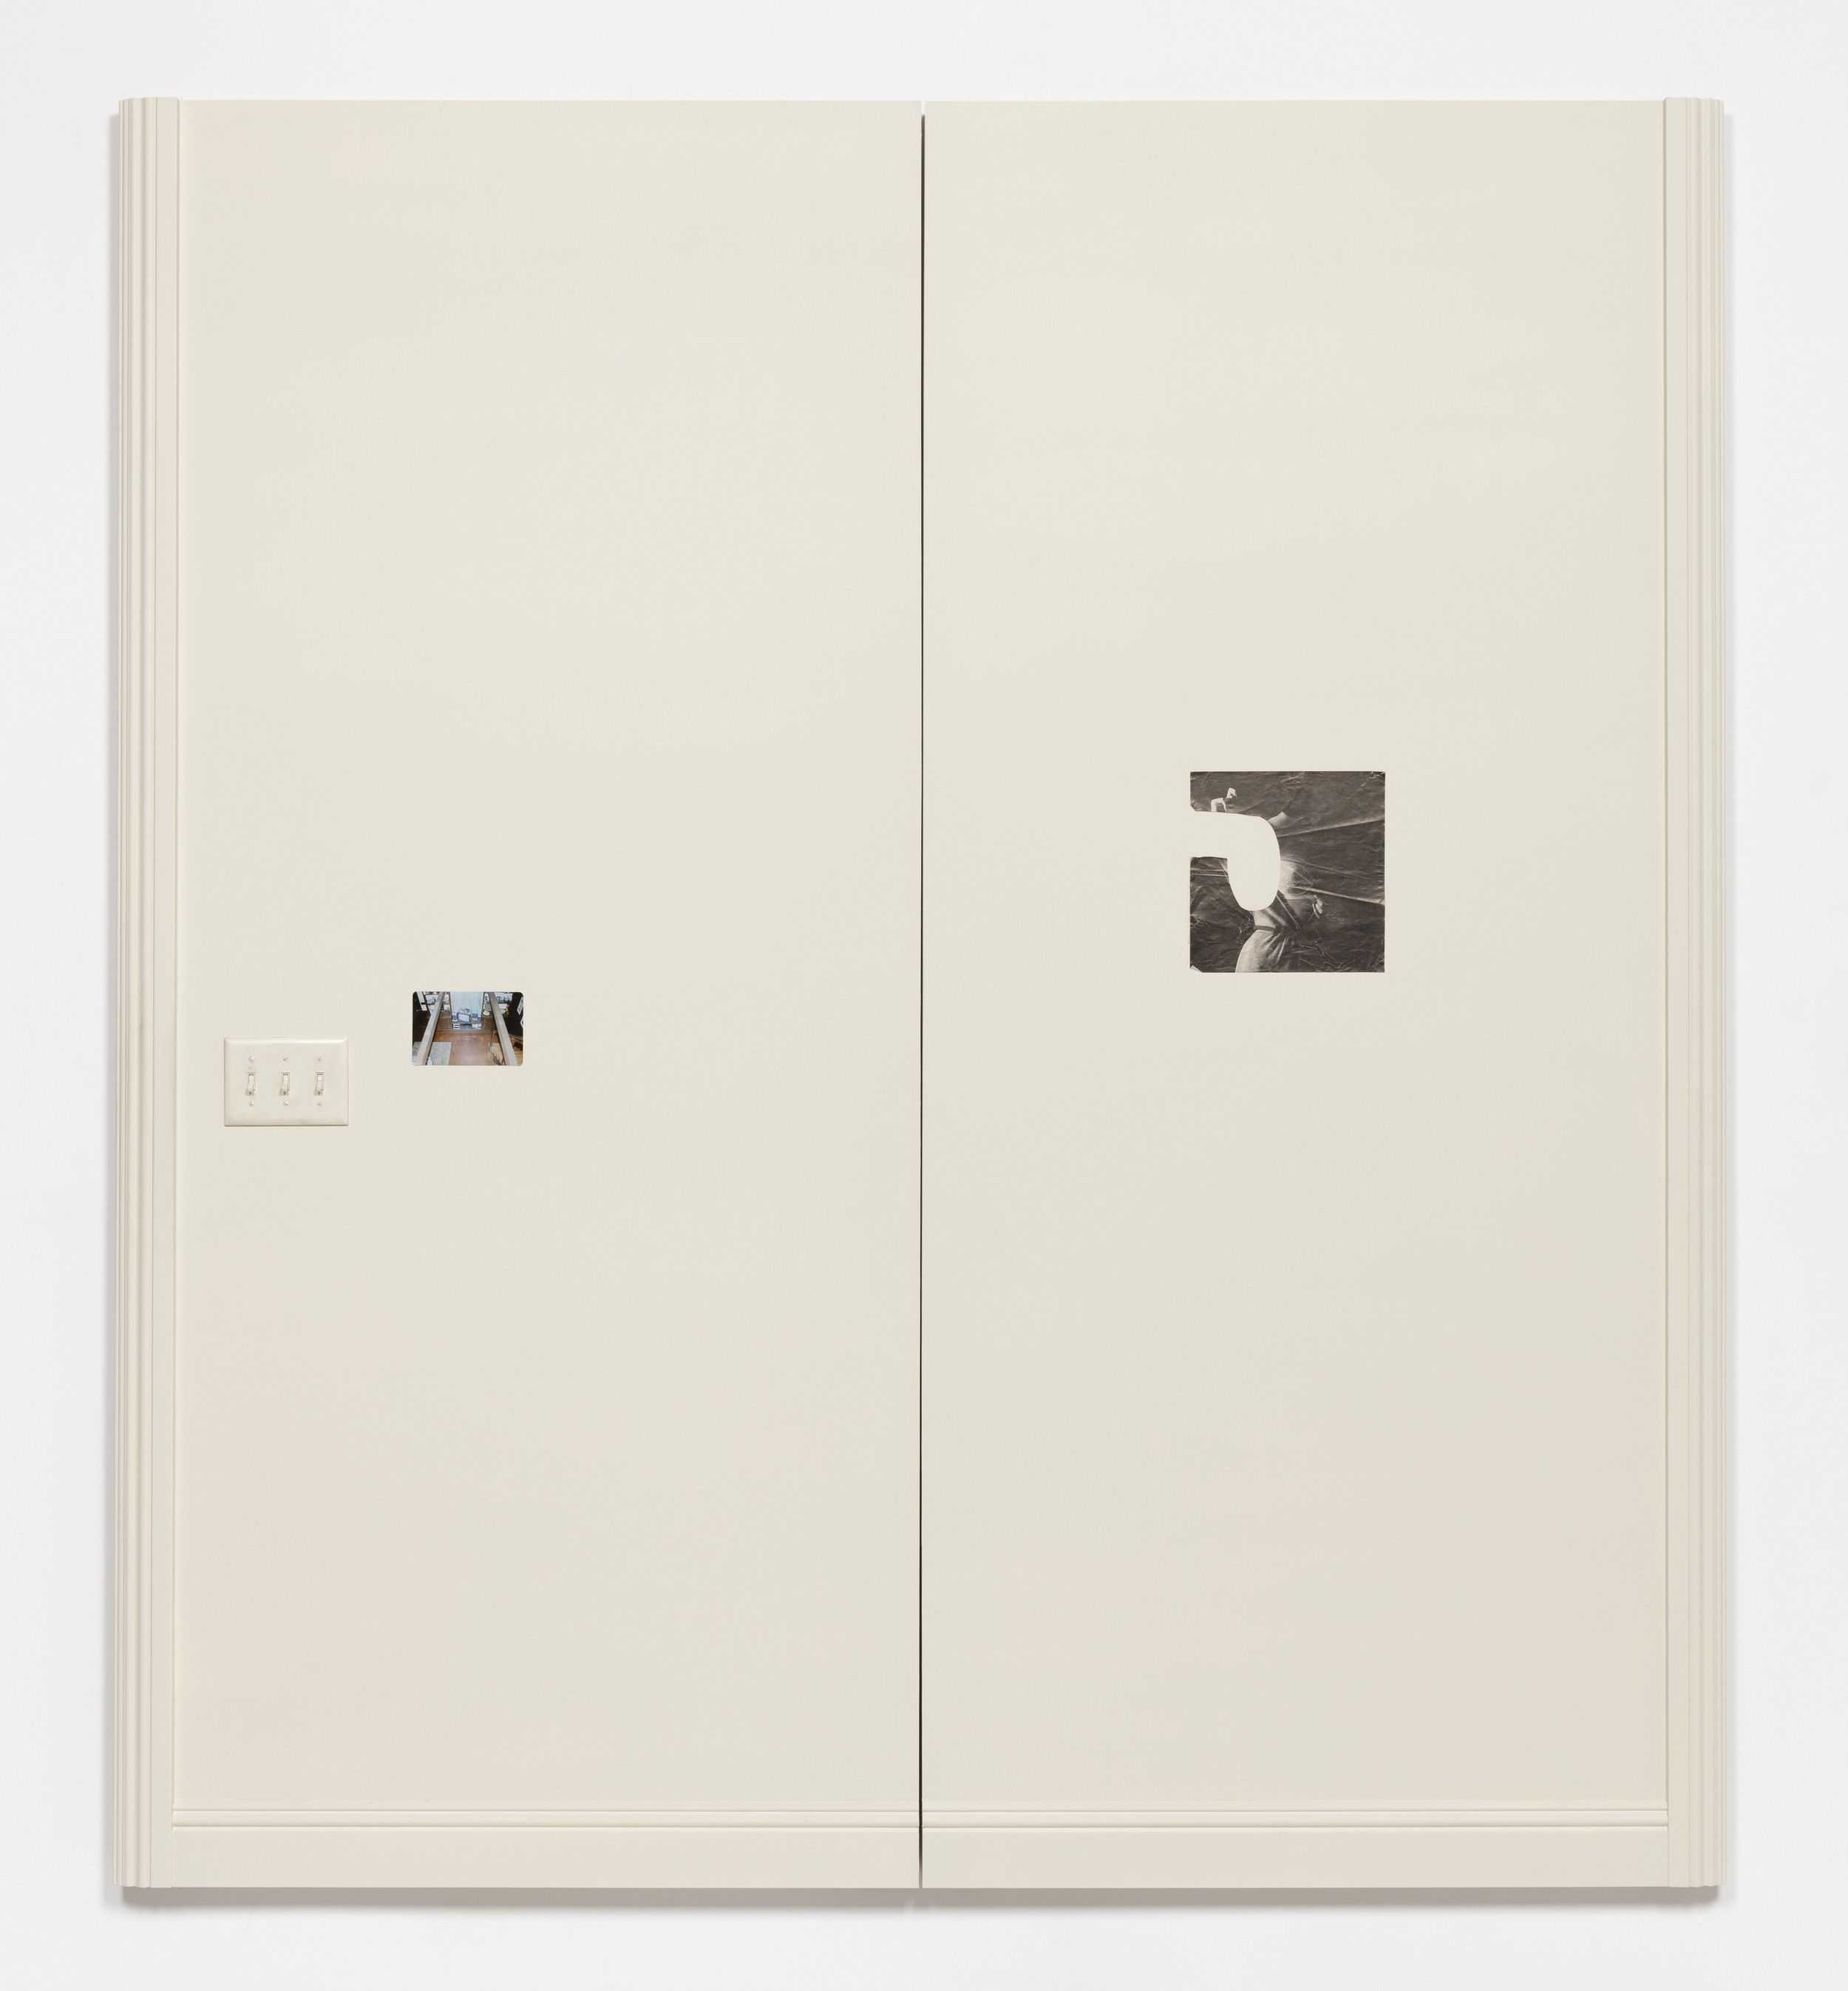  Andrew Chapman  Templates for Recall (2) , 2018 Light switches, moulding, color photo, magazine clipping, and latex paint on panels 95 x 86.5 x 2 inches 